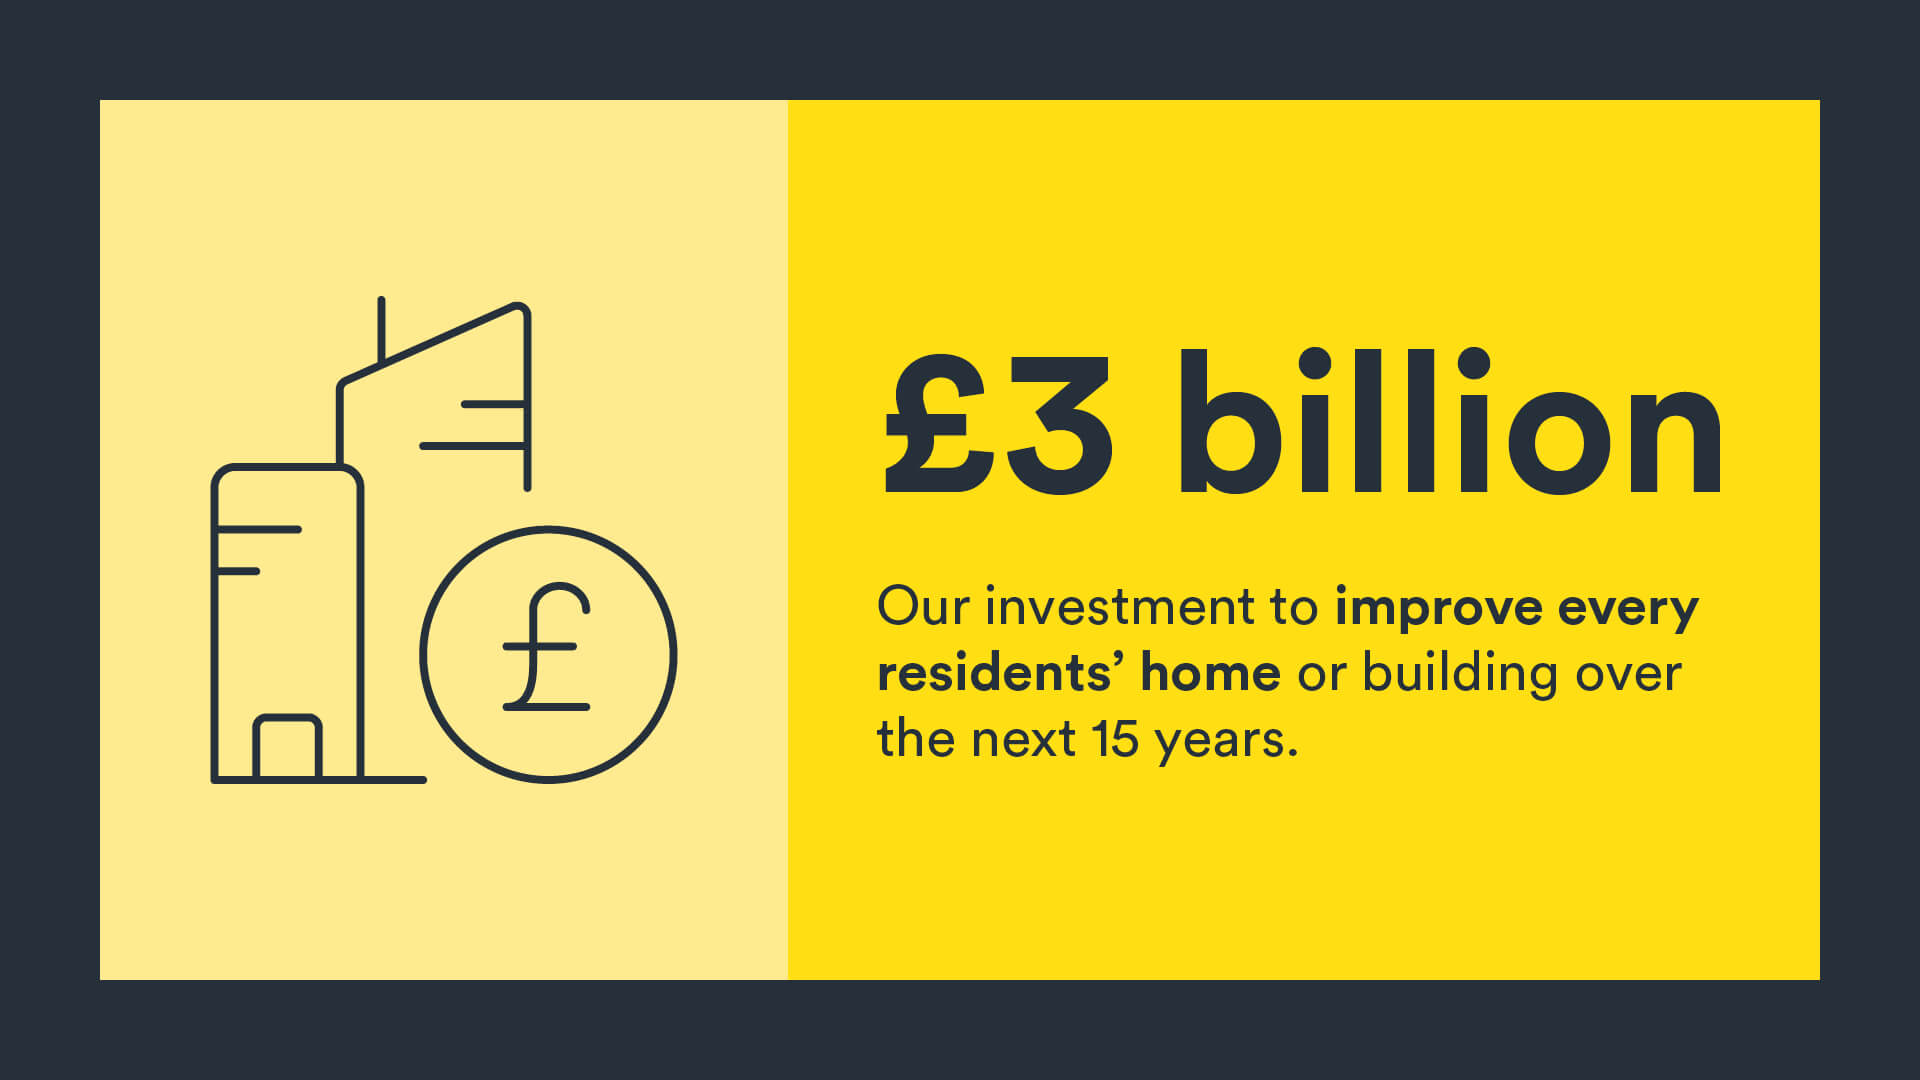 Infographic: £3 billion, our investment to improve every residents’ home or building over the next 15 years.